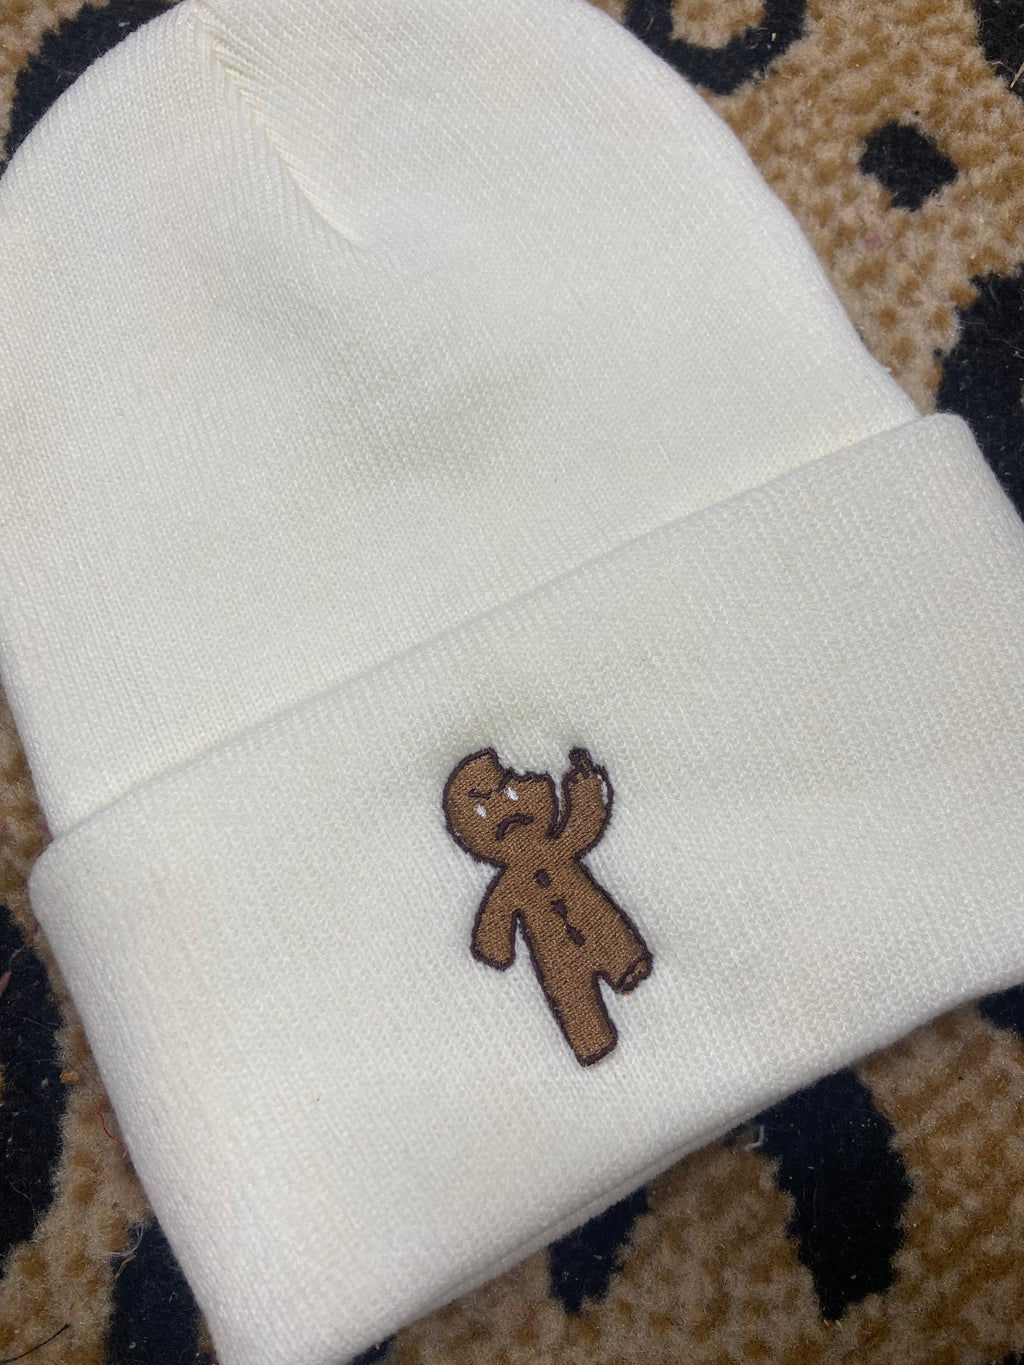 Gingerbread man middle finger beanie